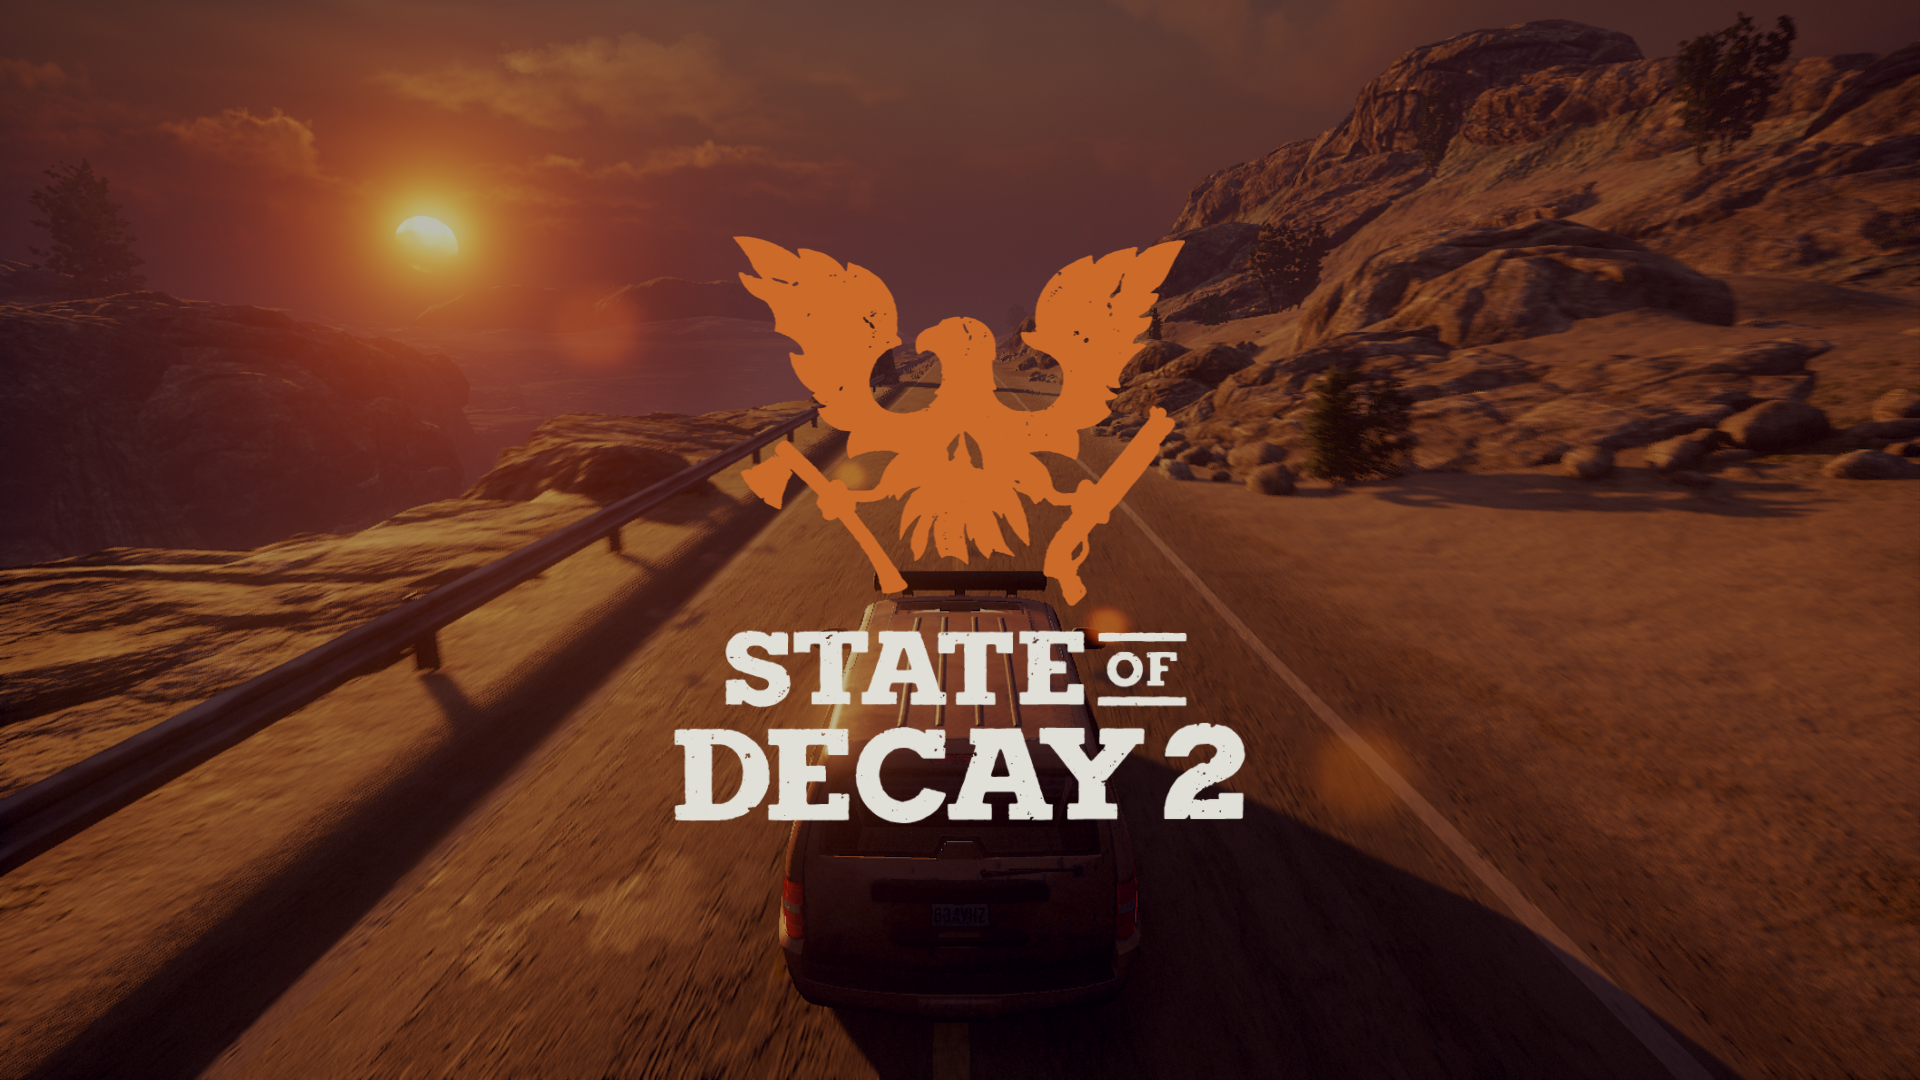 State of Decay 2 Reviews, Pros and Cons